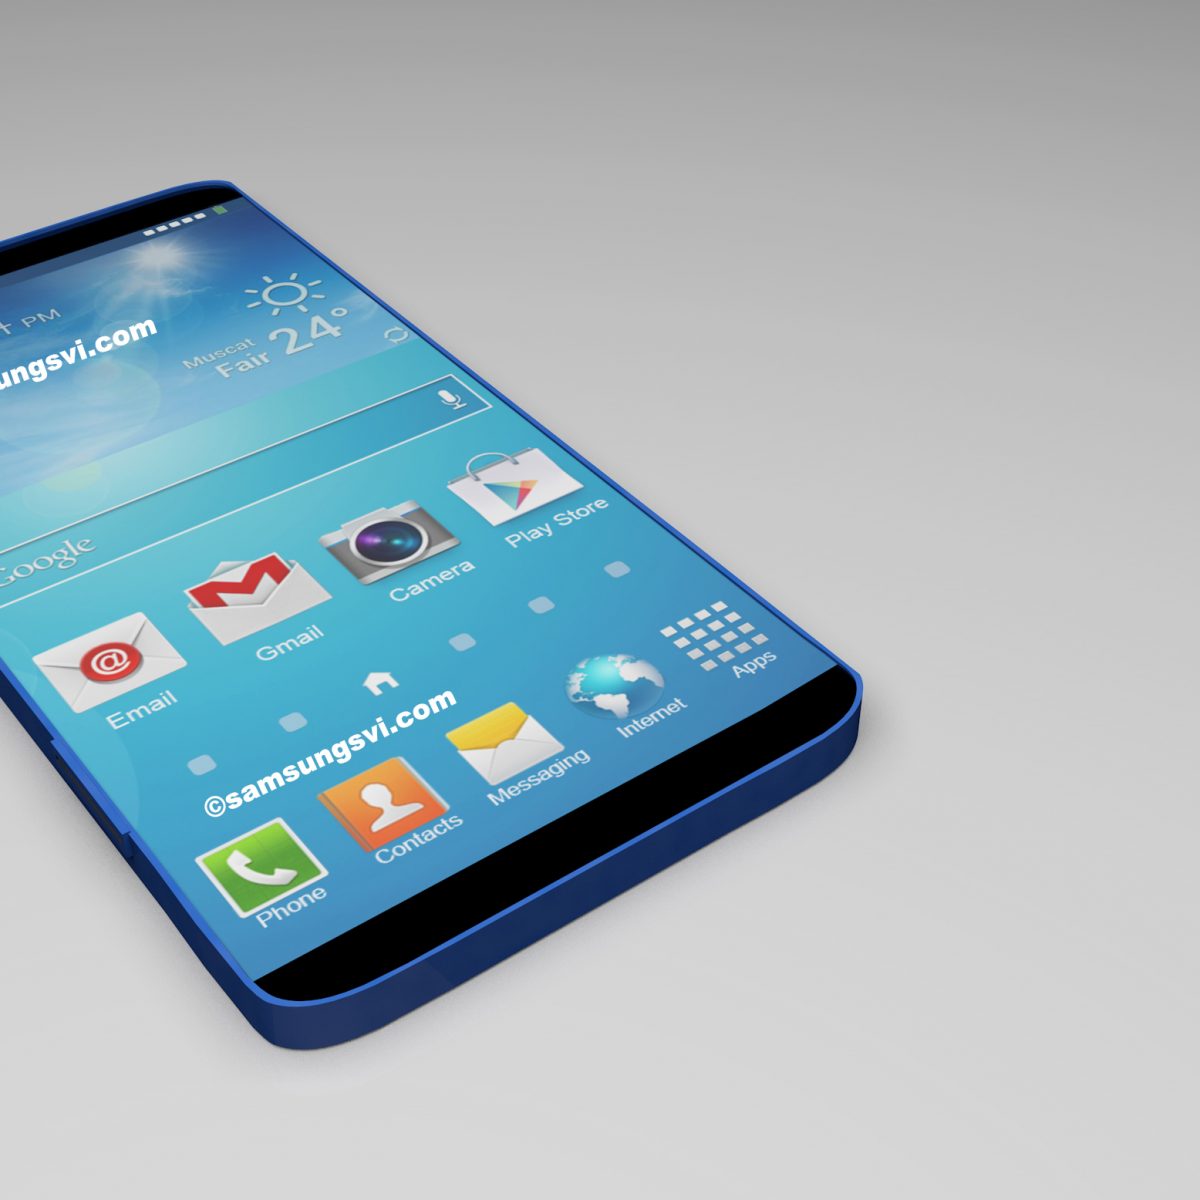 Galaxy S7: Revolution Is About To Release In 2015